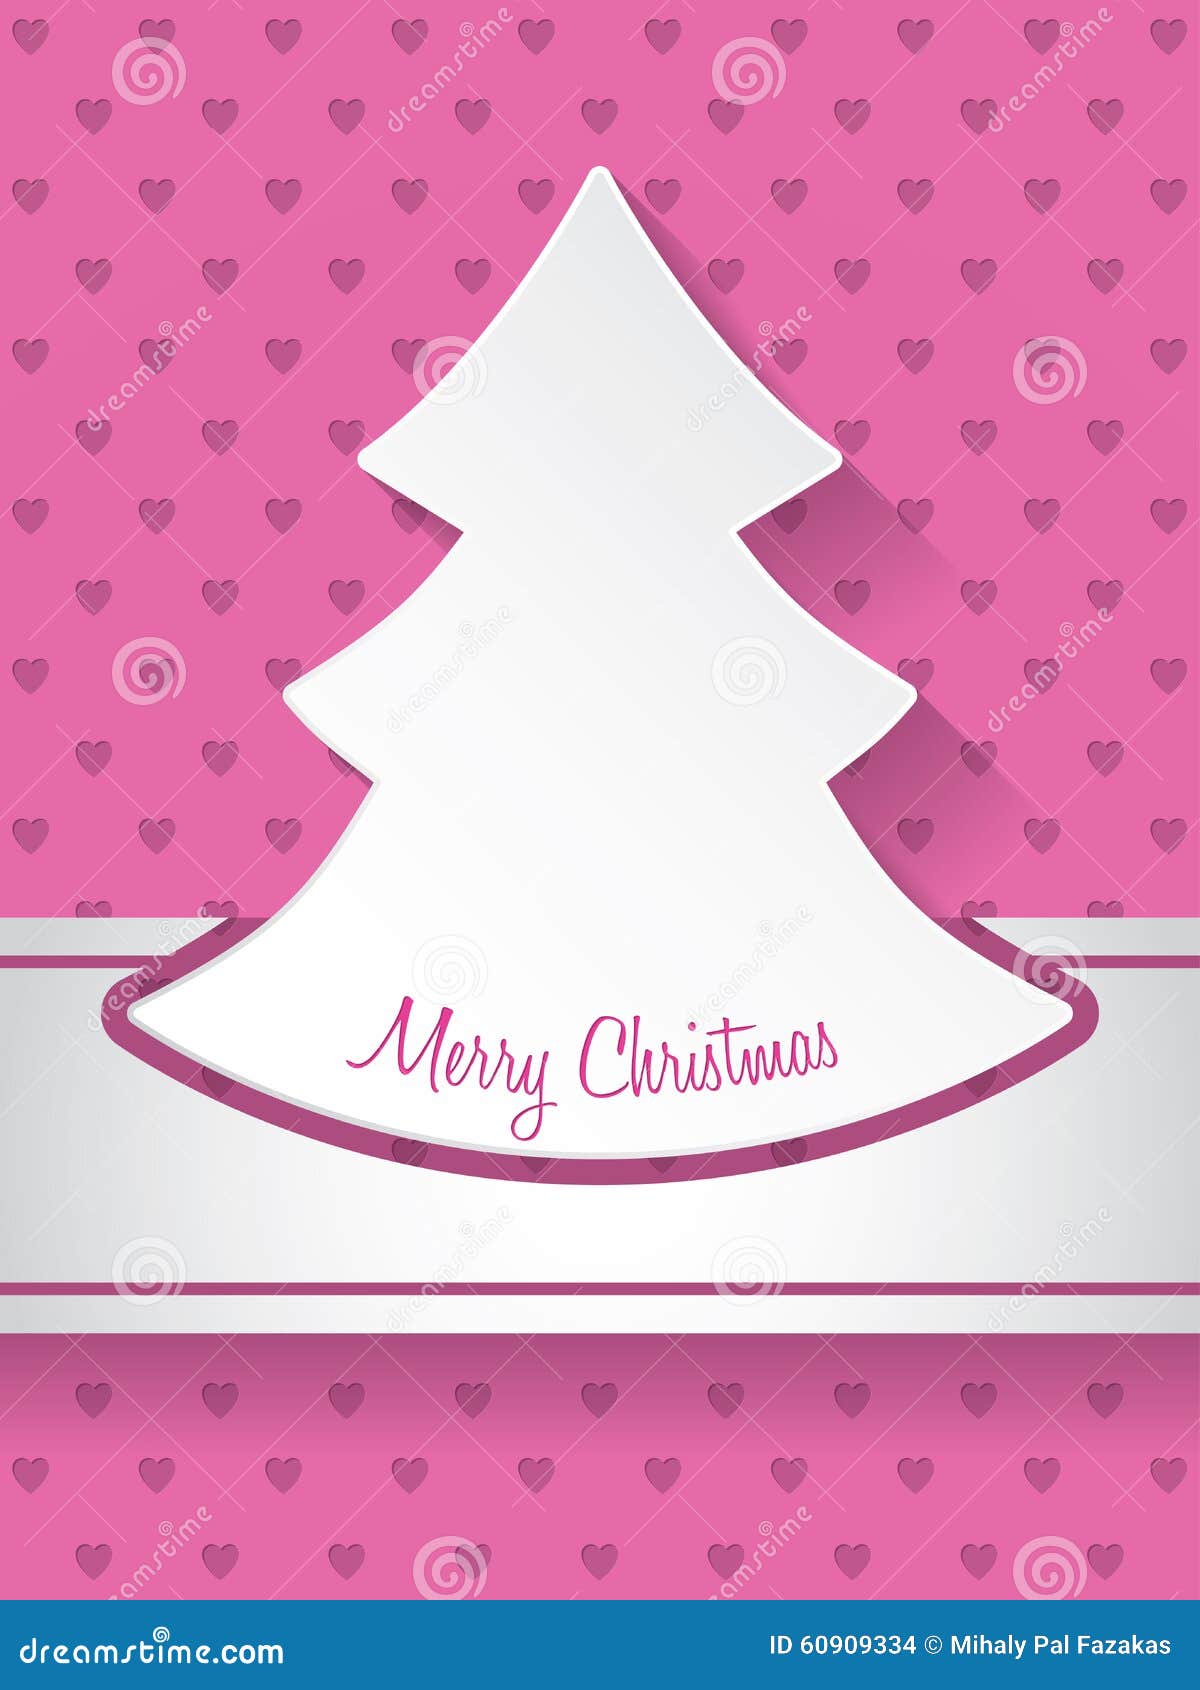 christmas greeting with christmastree and hearts background